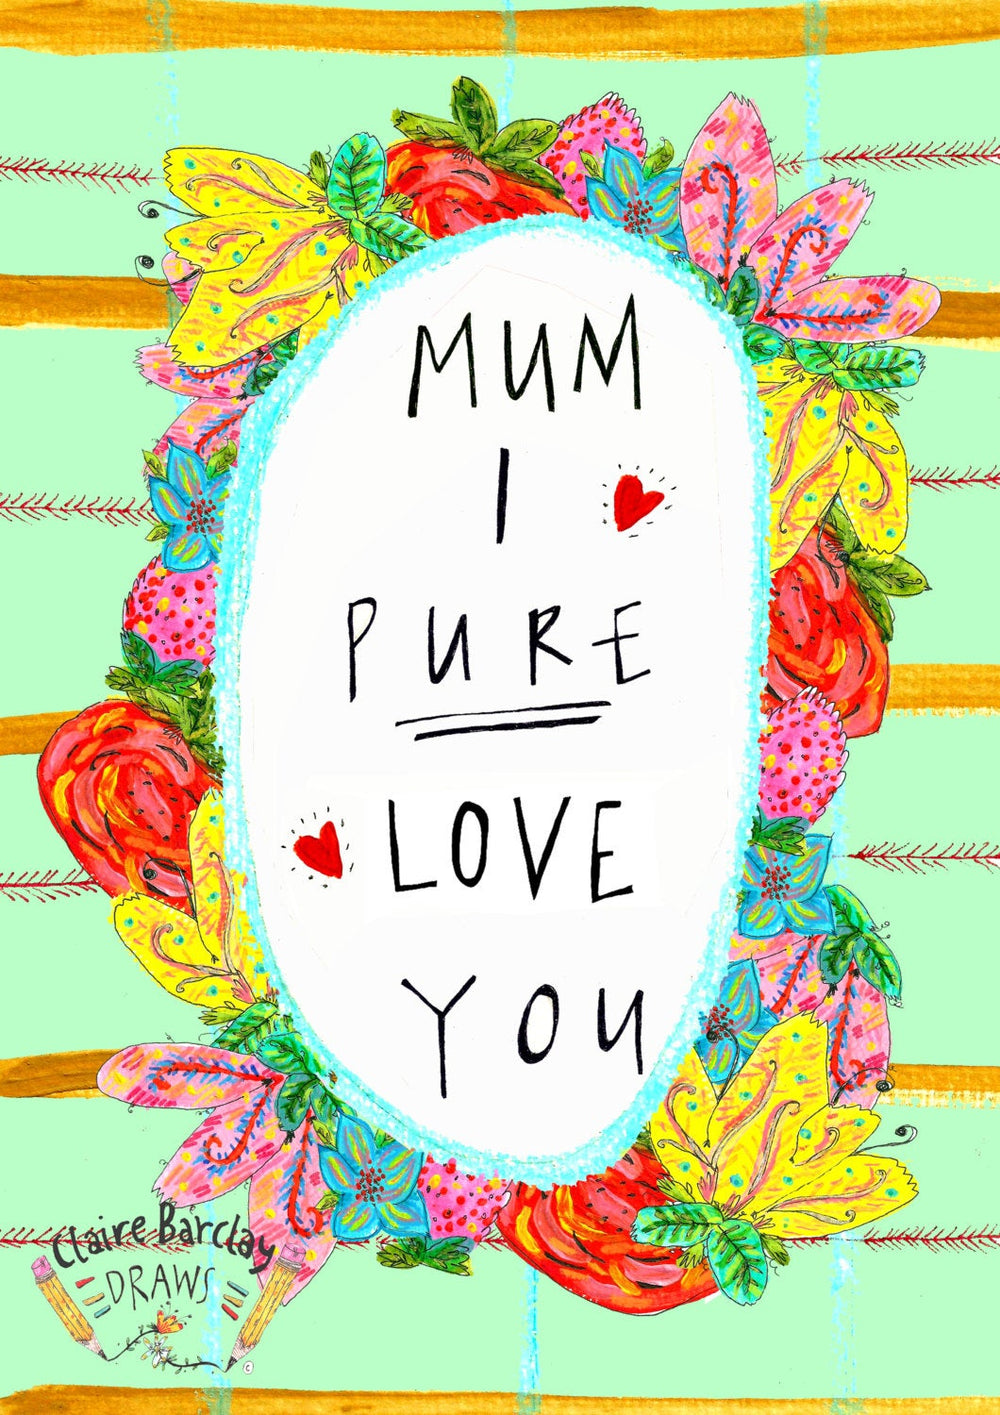 Mum I PURE LOVE YOU, Mother's Day Greetings Card